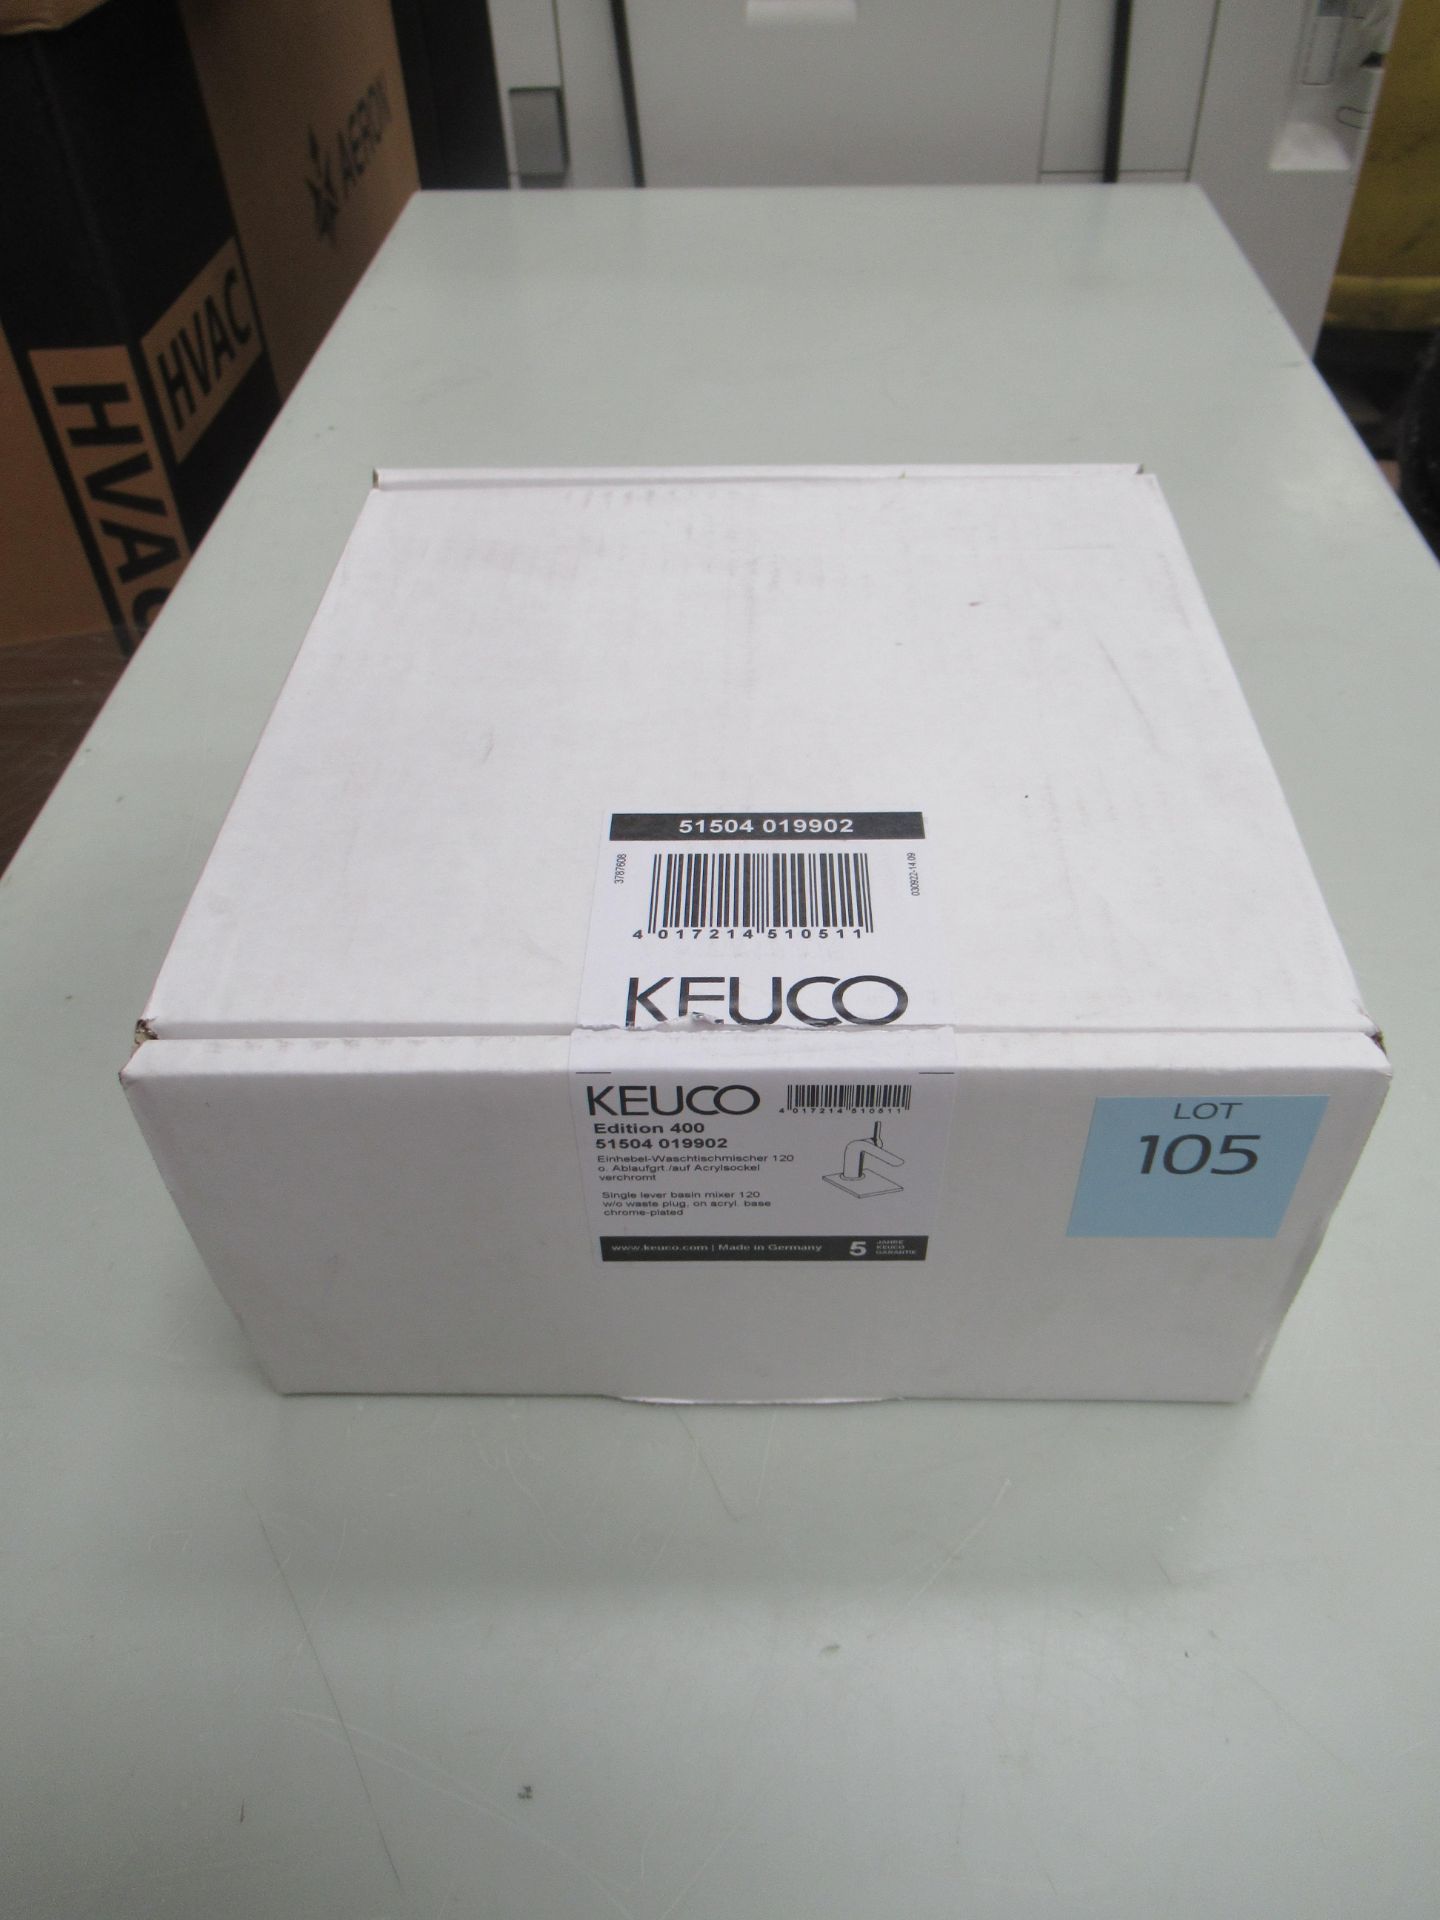 A Keuco Edition 400 Single Lever Basin Mixer 120- Tap, Chrome Plated, P/N 51504-019902